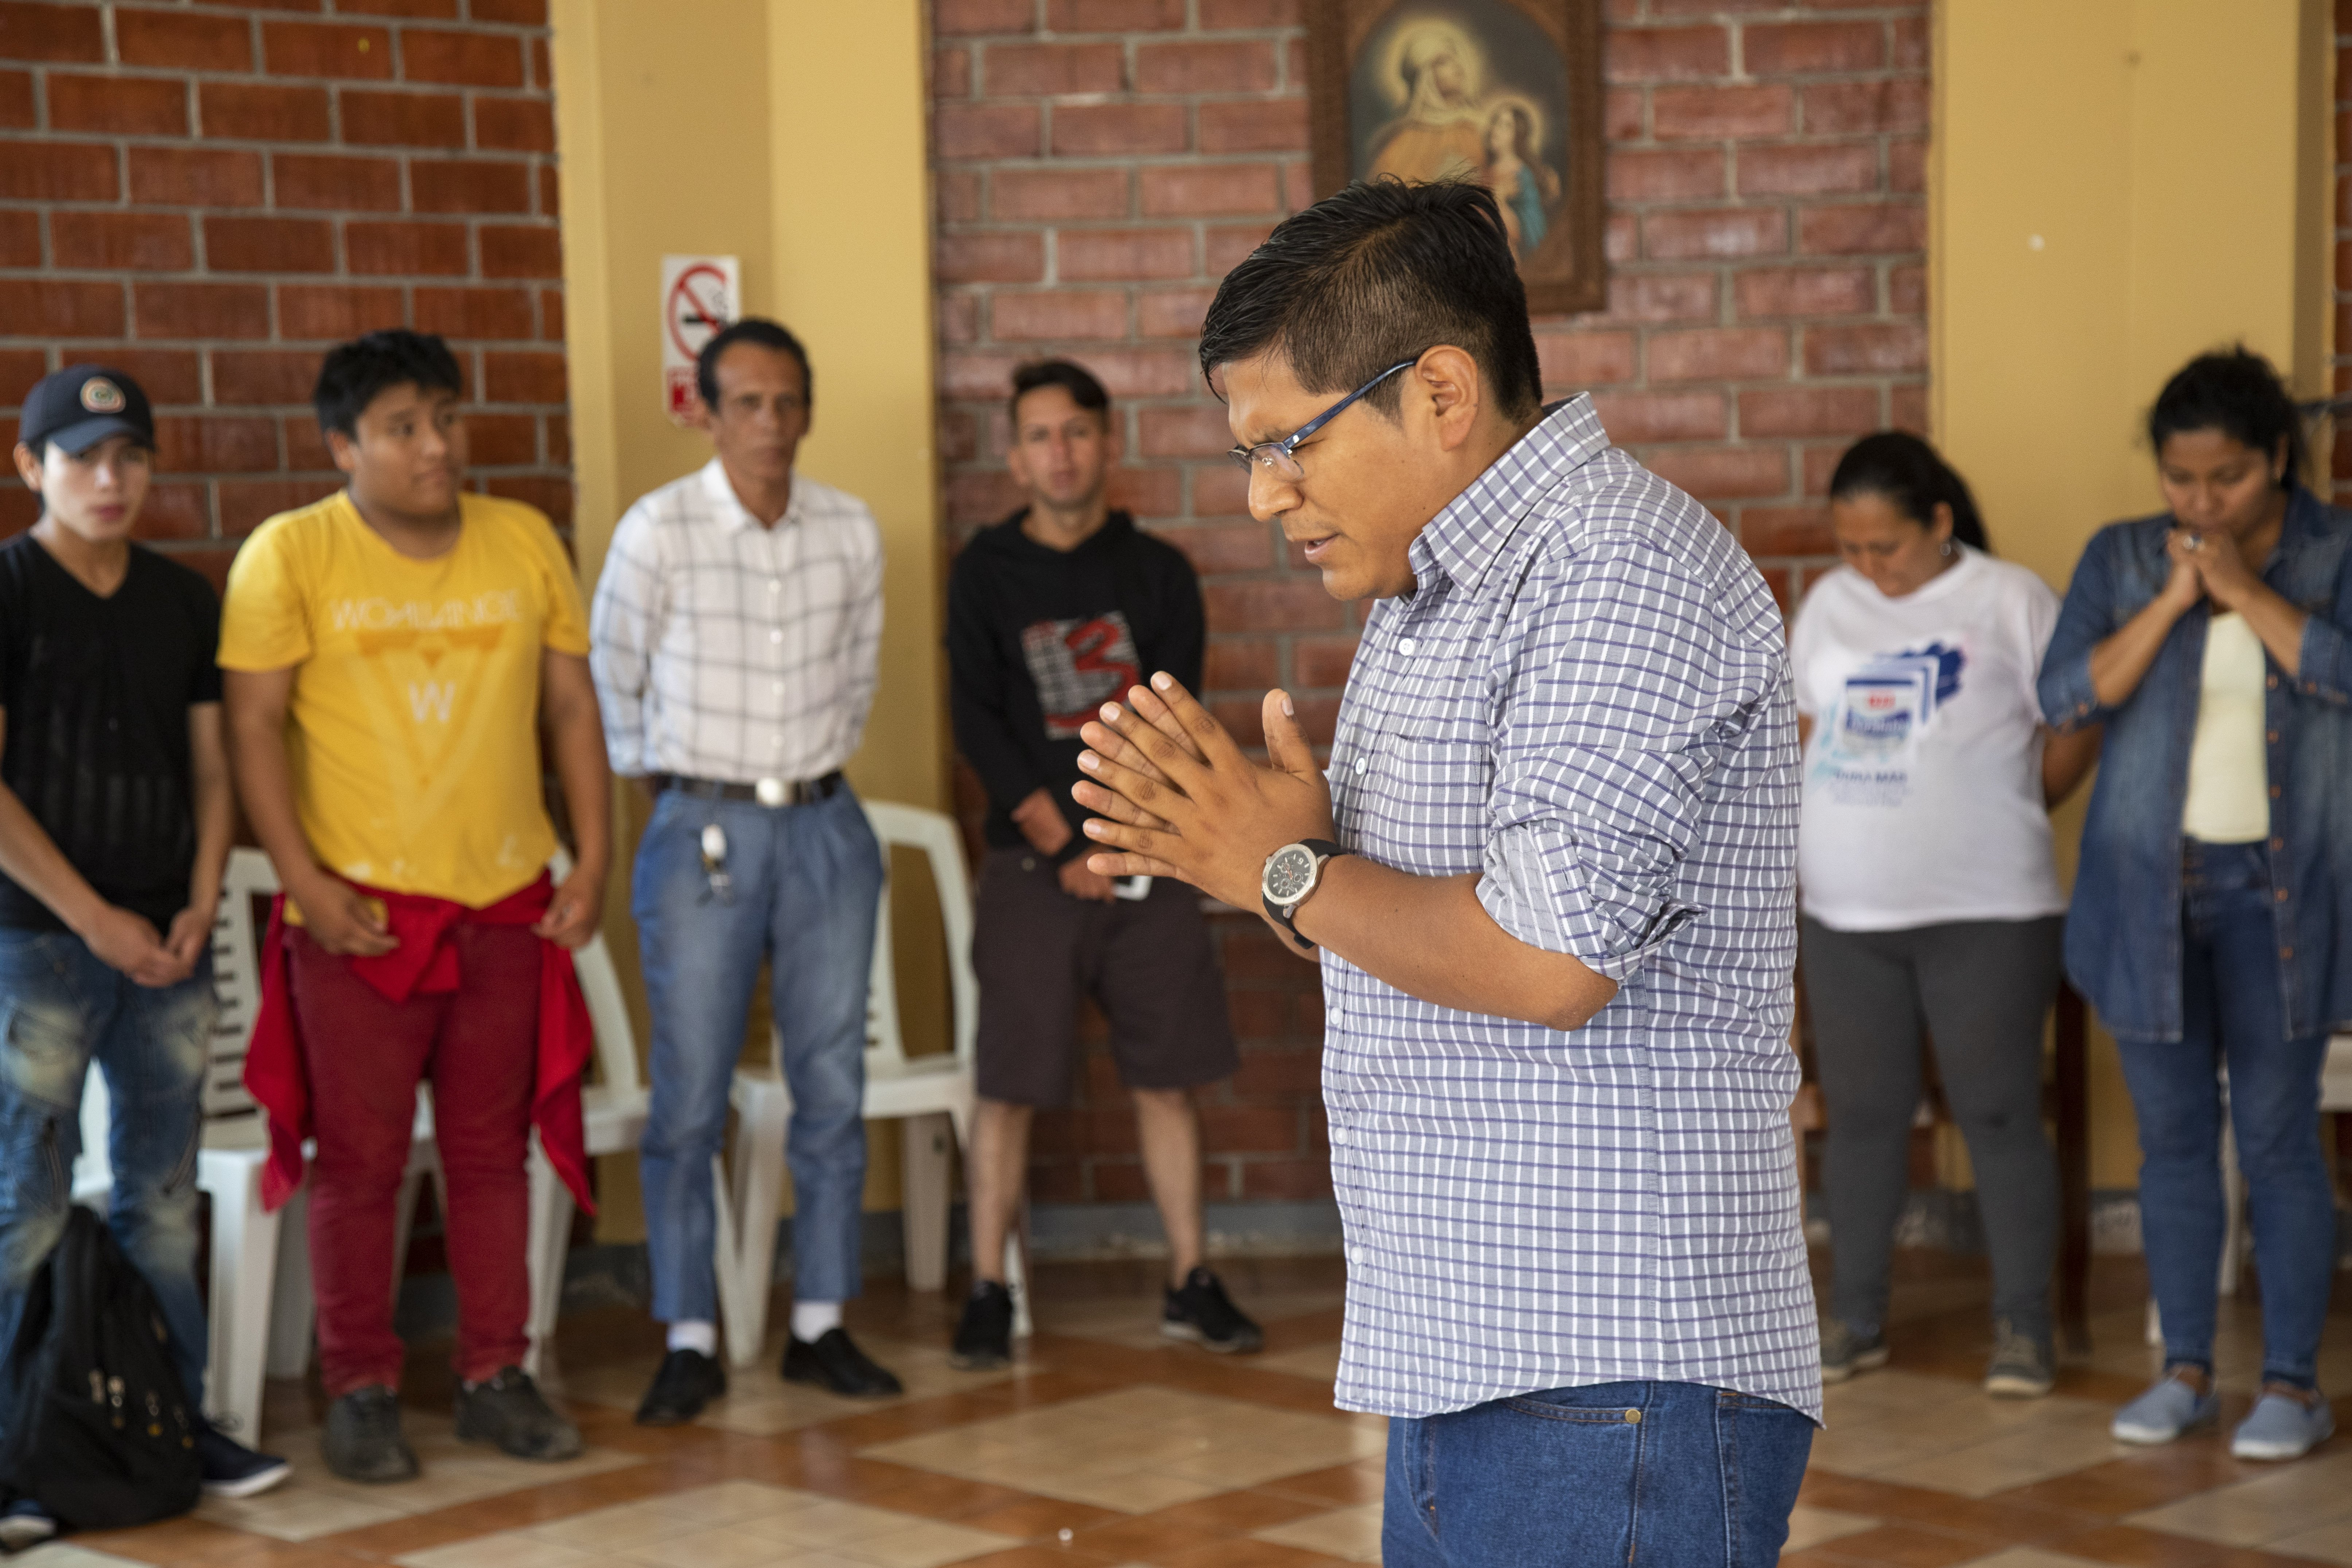 Abraham Luque, a catechist from the Scalabrinian Parish of Our Lady of the Perpetual Help, prays during a Christmas event at the Scalabrini welcome center in Lima, Peru, in this Dec. 16, 2018, file photo.  (CNS photo/Oscar Durand)